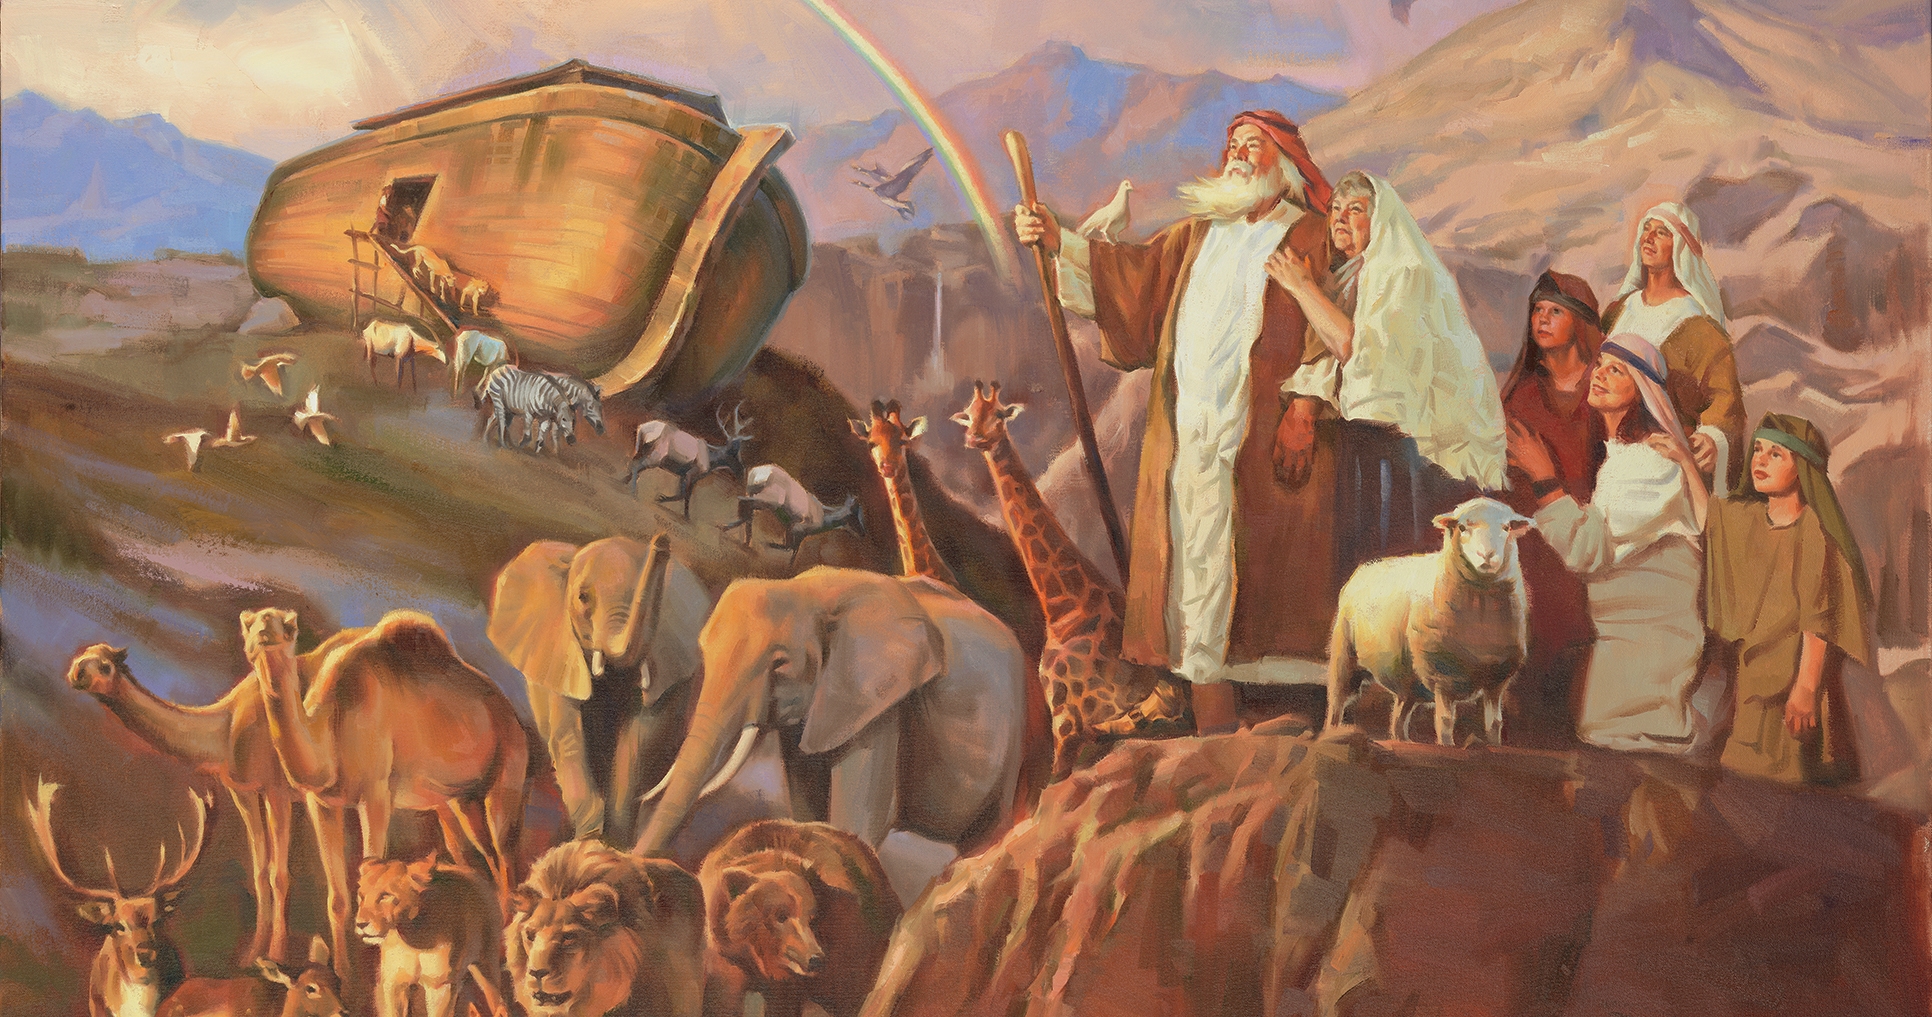 Noah and his family standing on a rock.  They are surrounded by animals who are leaving the ark.  There is a rainbow in the sky.